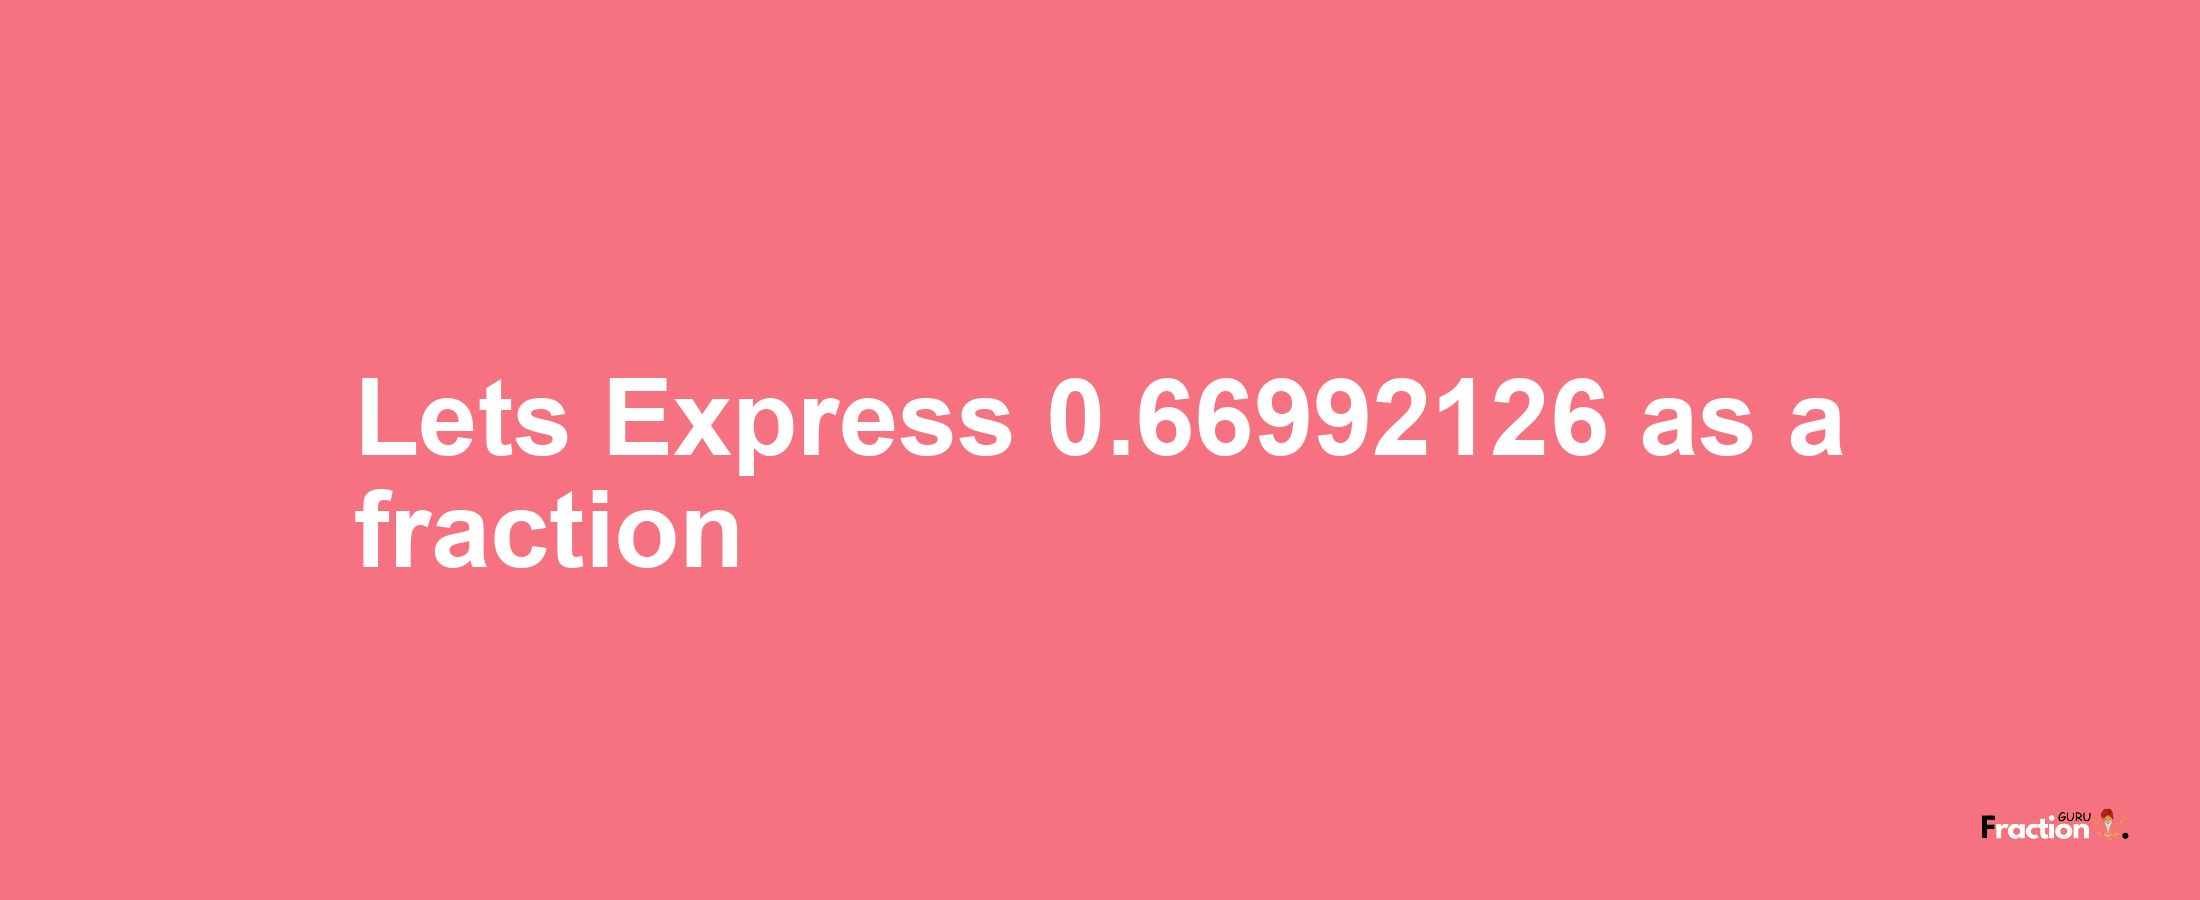 Lets Express 0.66992126 as afraction